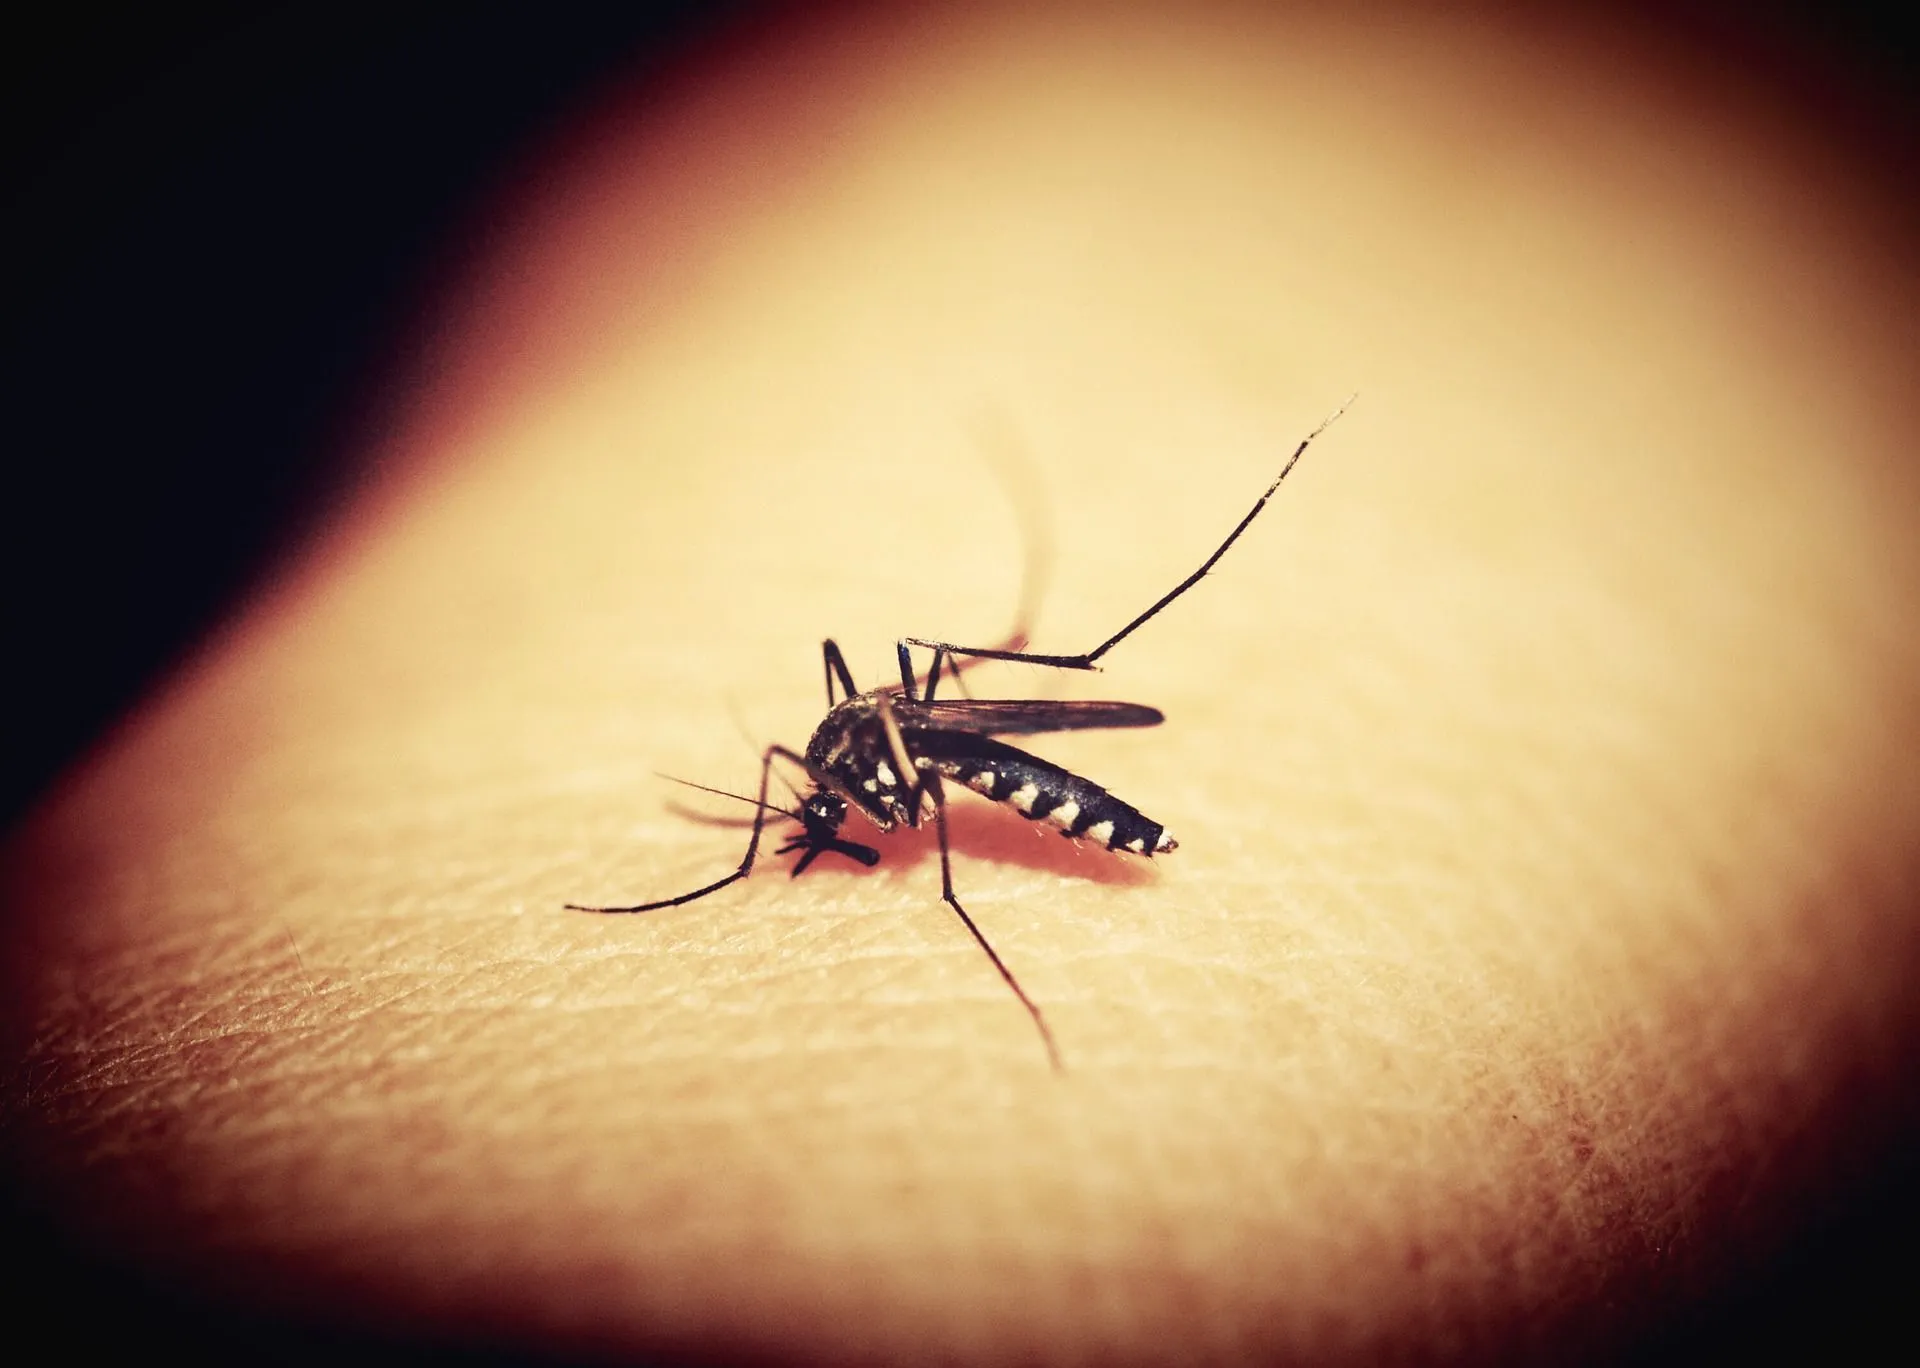 Mosquito is an insect that is most active during the rainy season and is found in puddles.